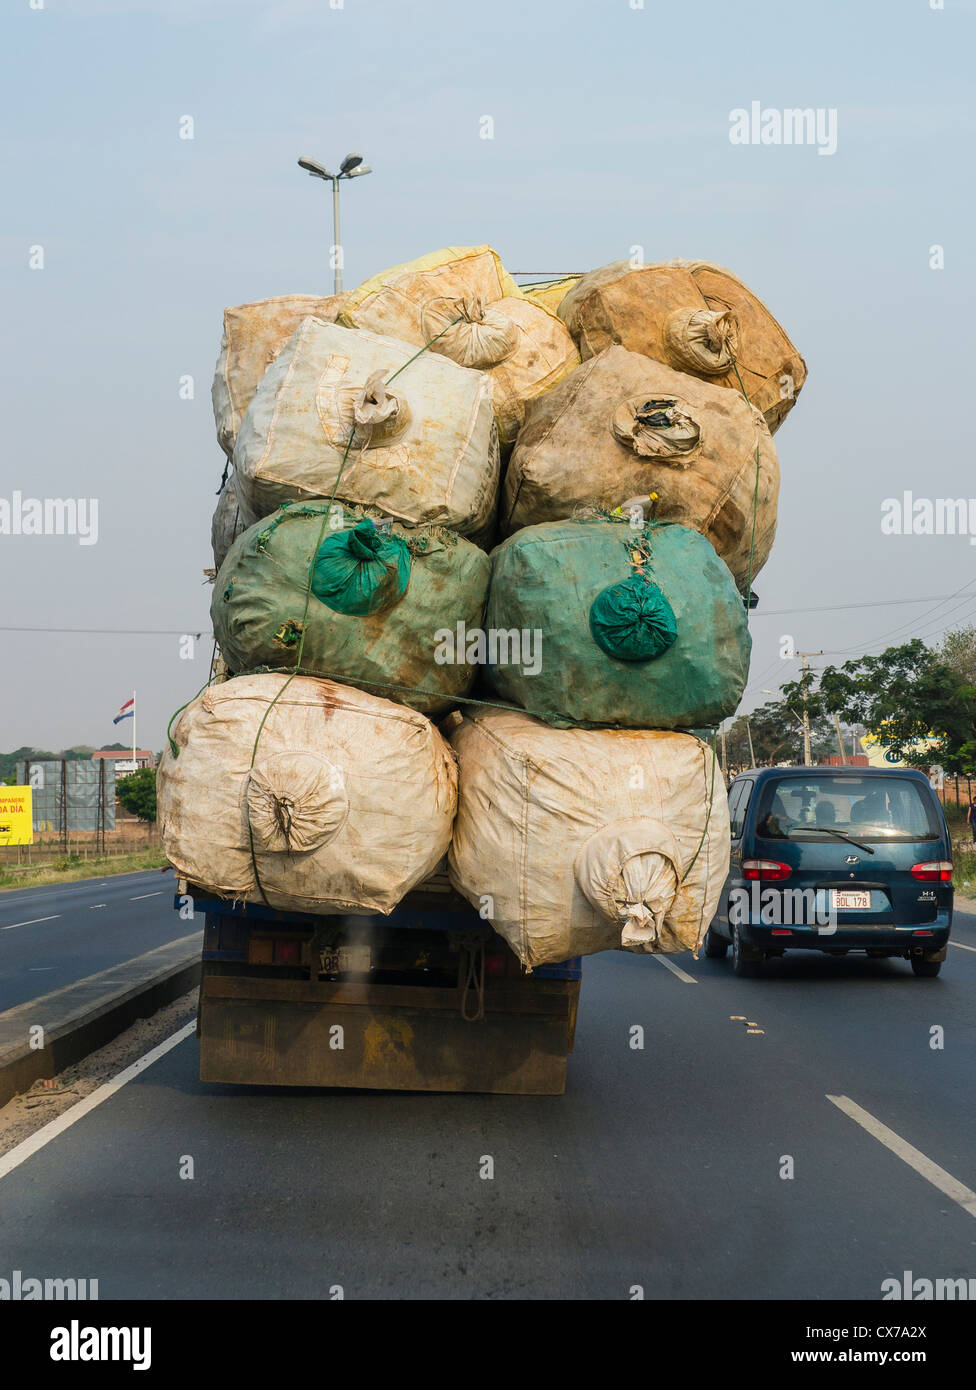 Overloaded truck Stock Photos, Royalty Free Overloaded truck Images